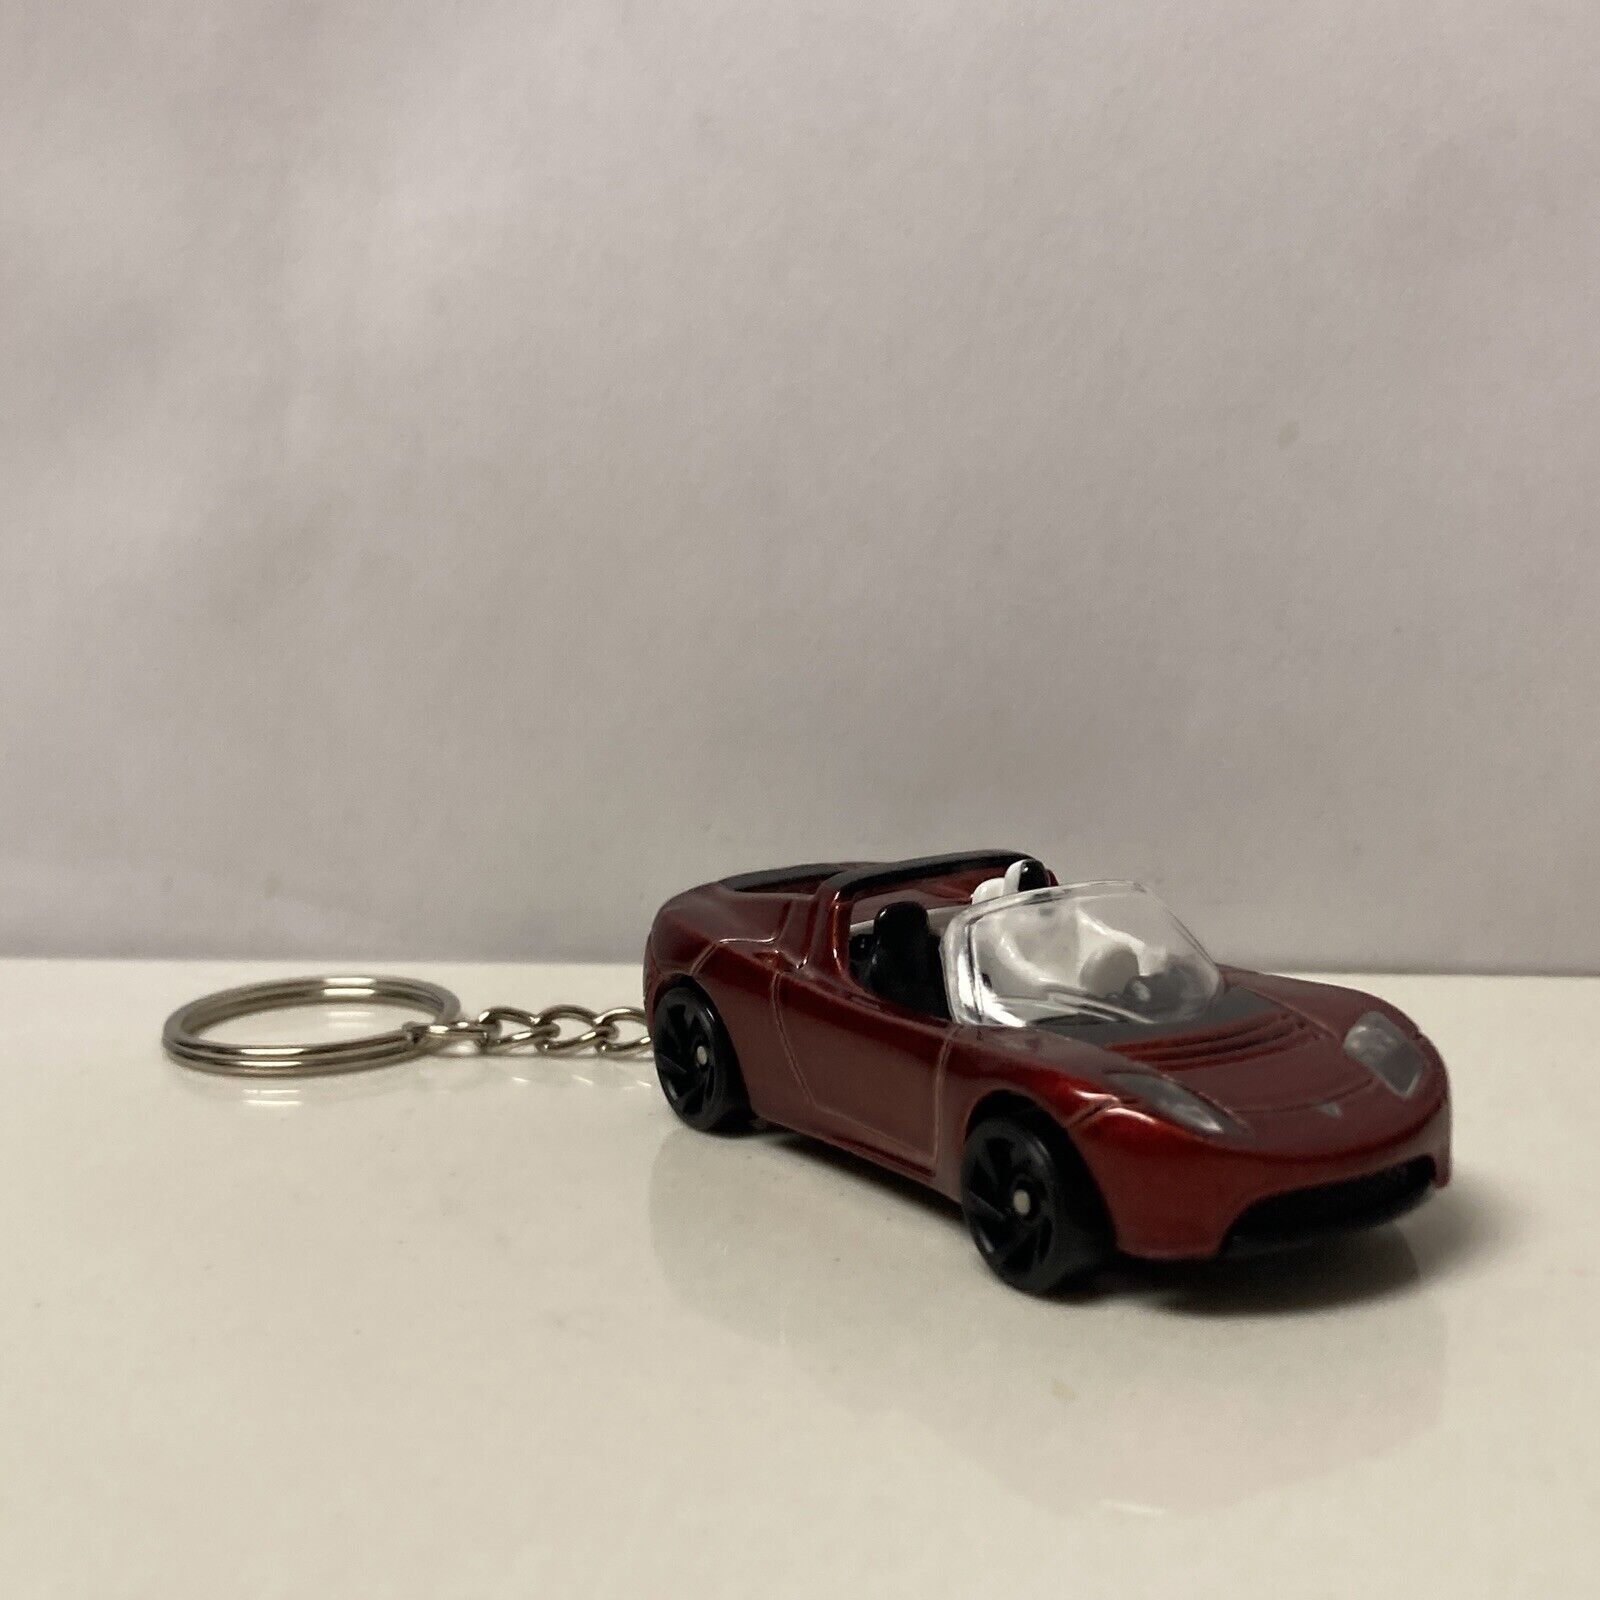 RARE KEY CHAIN RED TESLA ROADSTER SPACEMAN CUSTOM LIMITED EDITION 2008 2009-2012